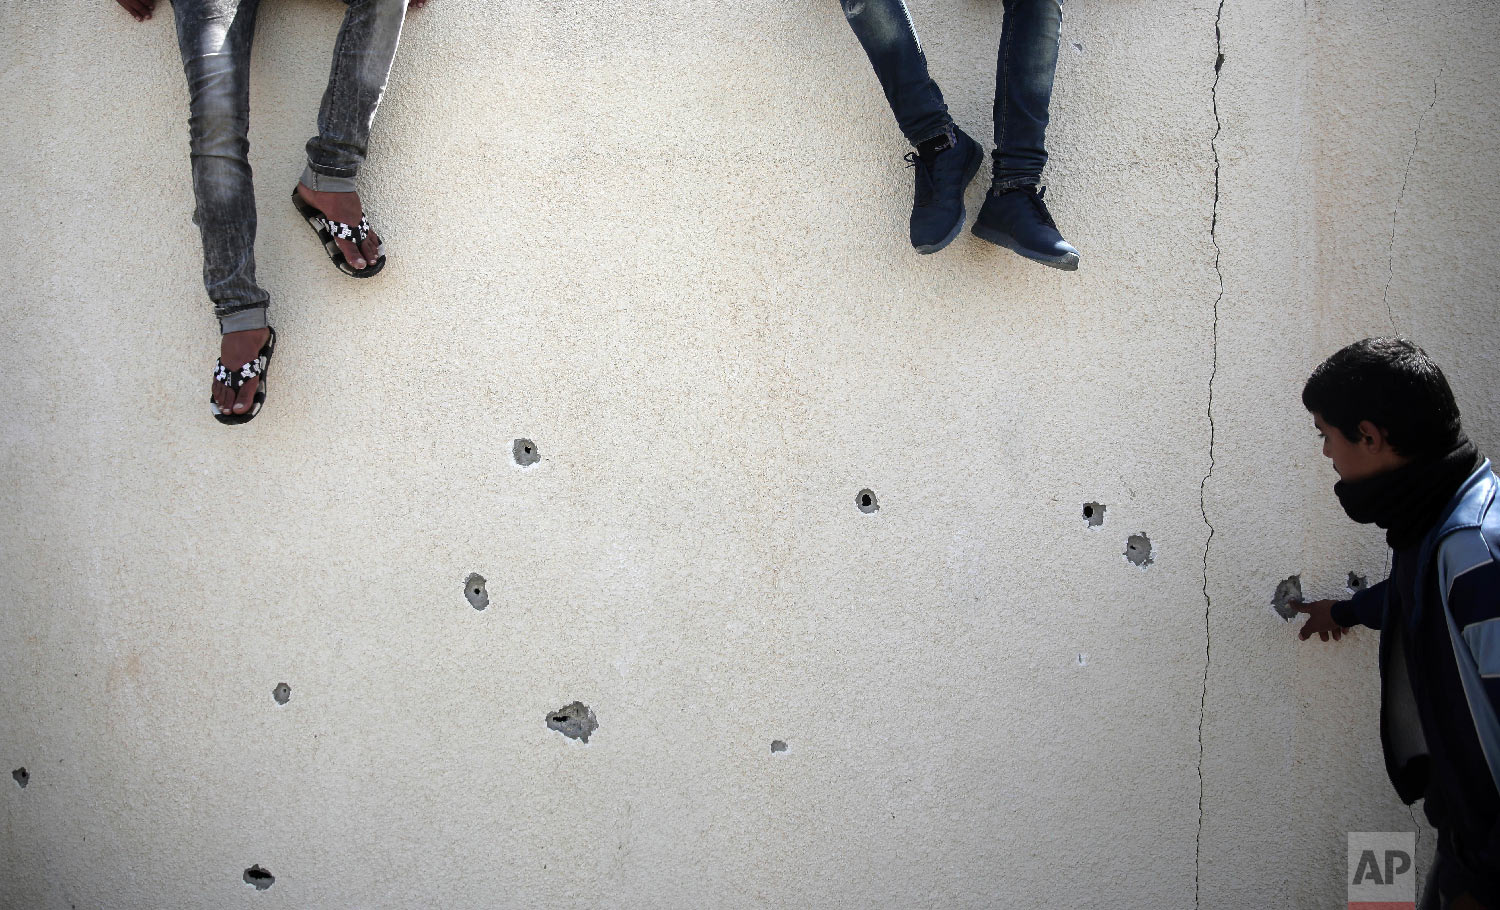  Palestinians check bullet holes in a wall following an exchange of gunfire between Palestinian Hamas security forces and suspects wanted for a bombing that targeted the visiting Palestinian premier's convoy last week in Gaza, in the town of Nuseirat, central Gaza Strip, Thursday, March 22, 2018. (AP Photo/ Khalil Hamra) 